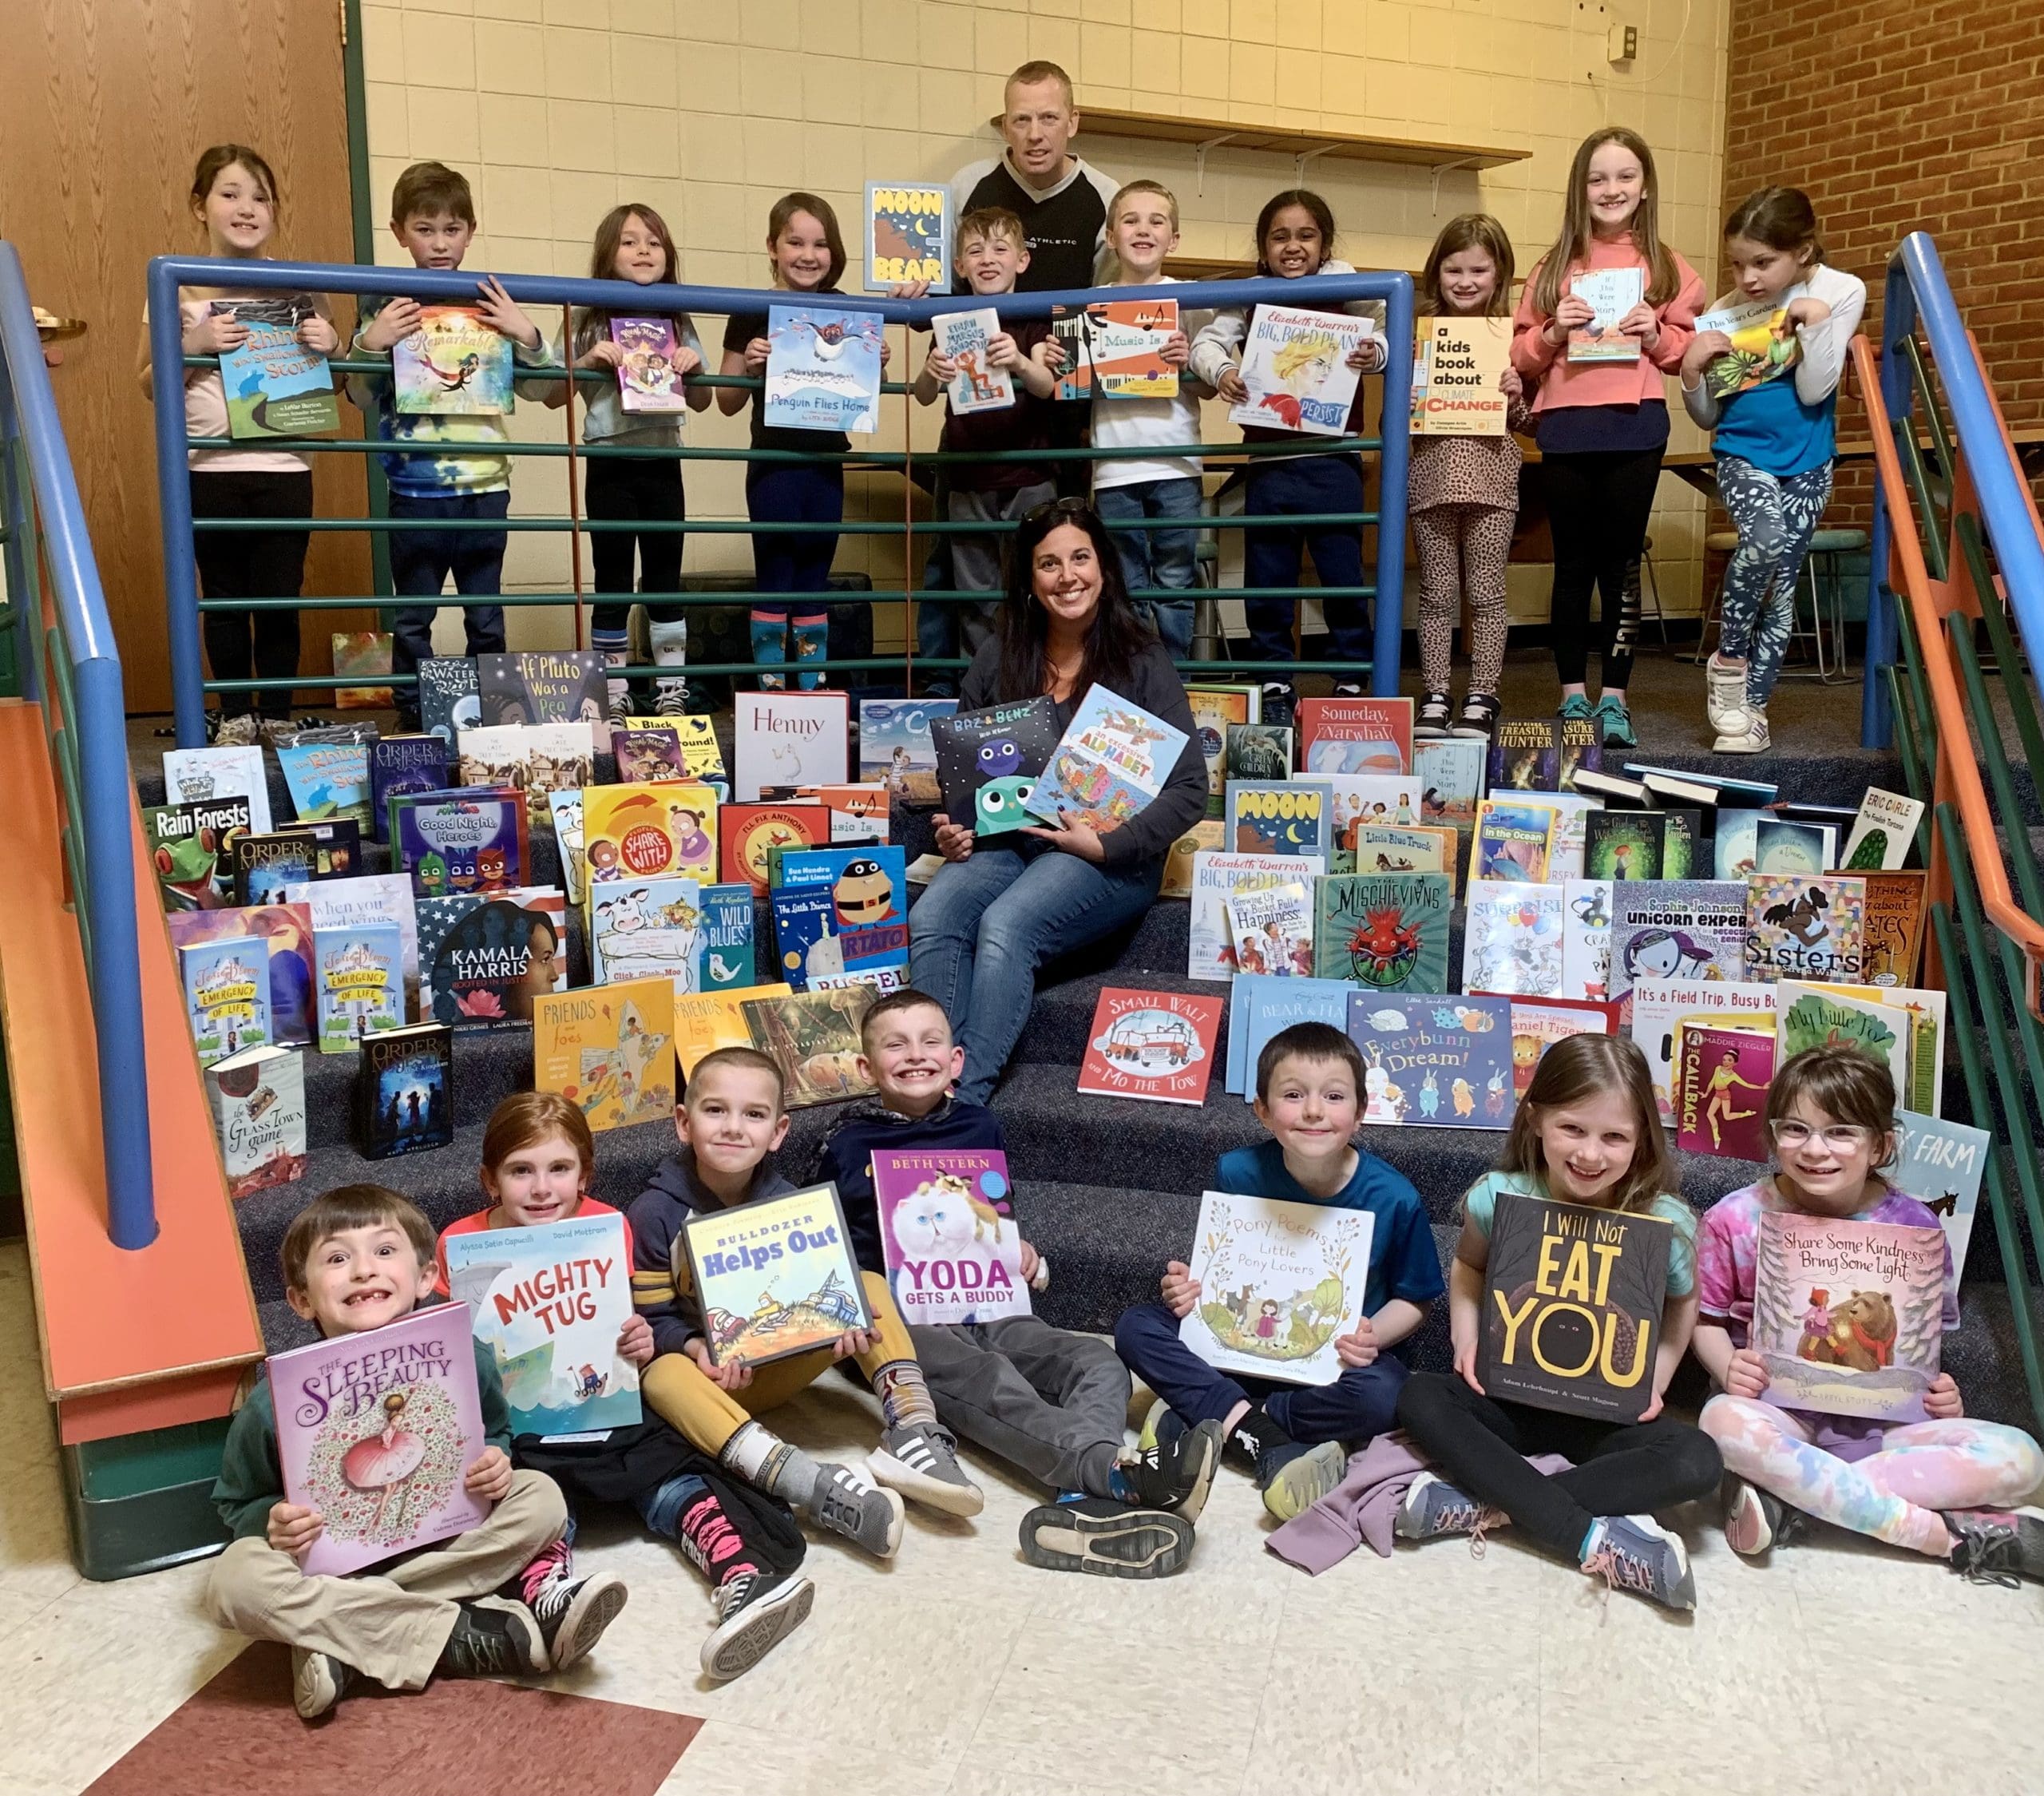 Teachers and students with books